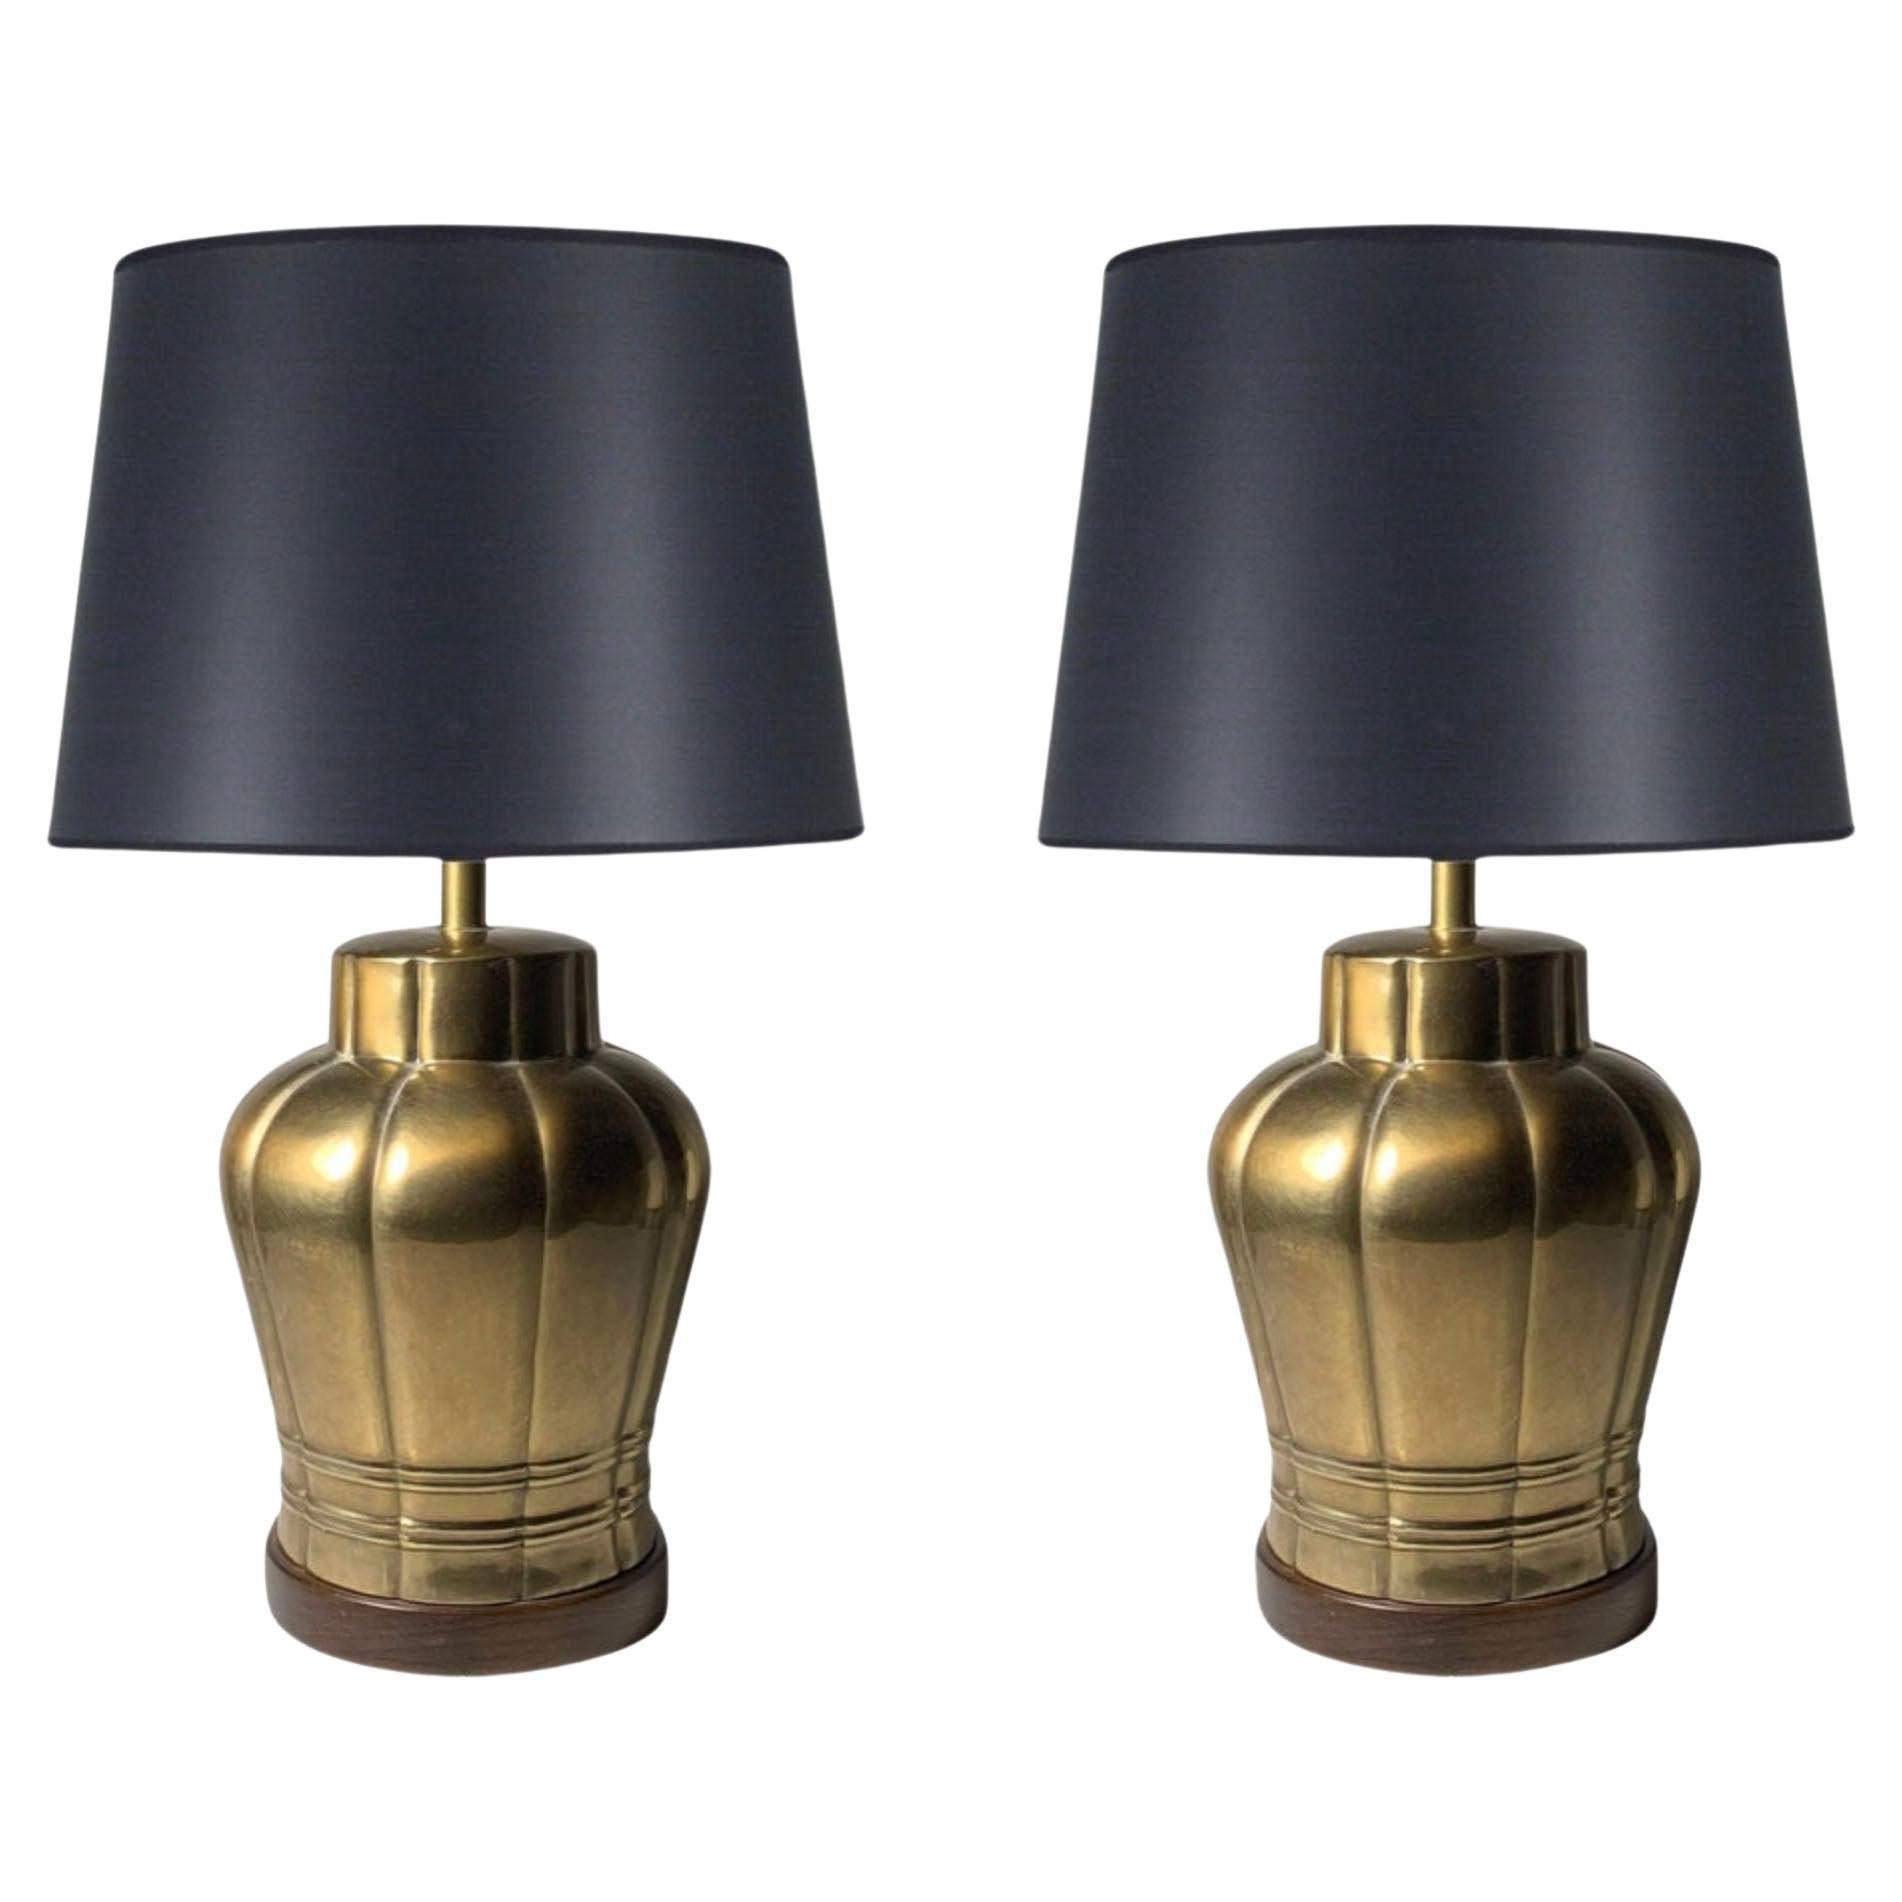 Pair of Vintage Brass Table Lamps by Frederick Cooper For Sale